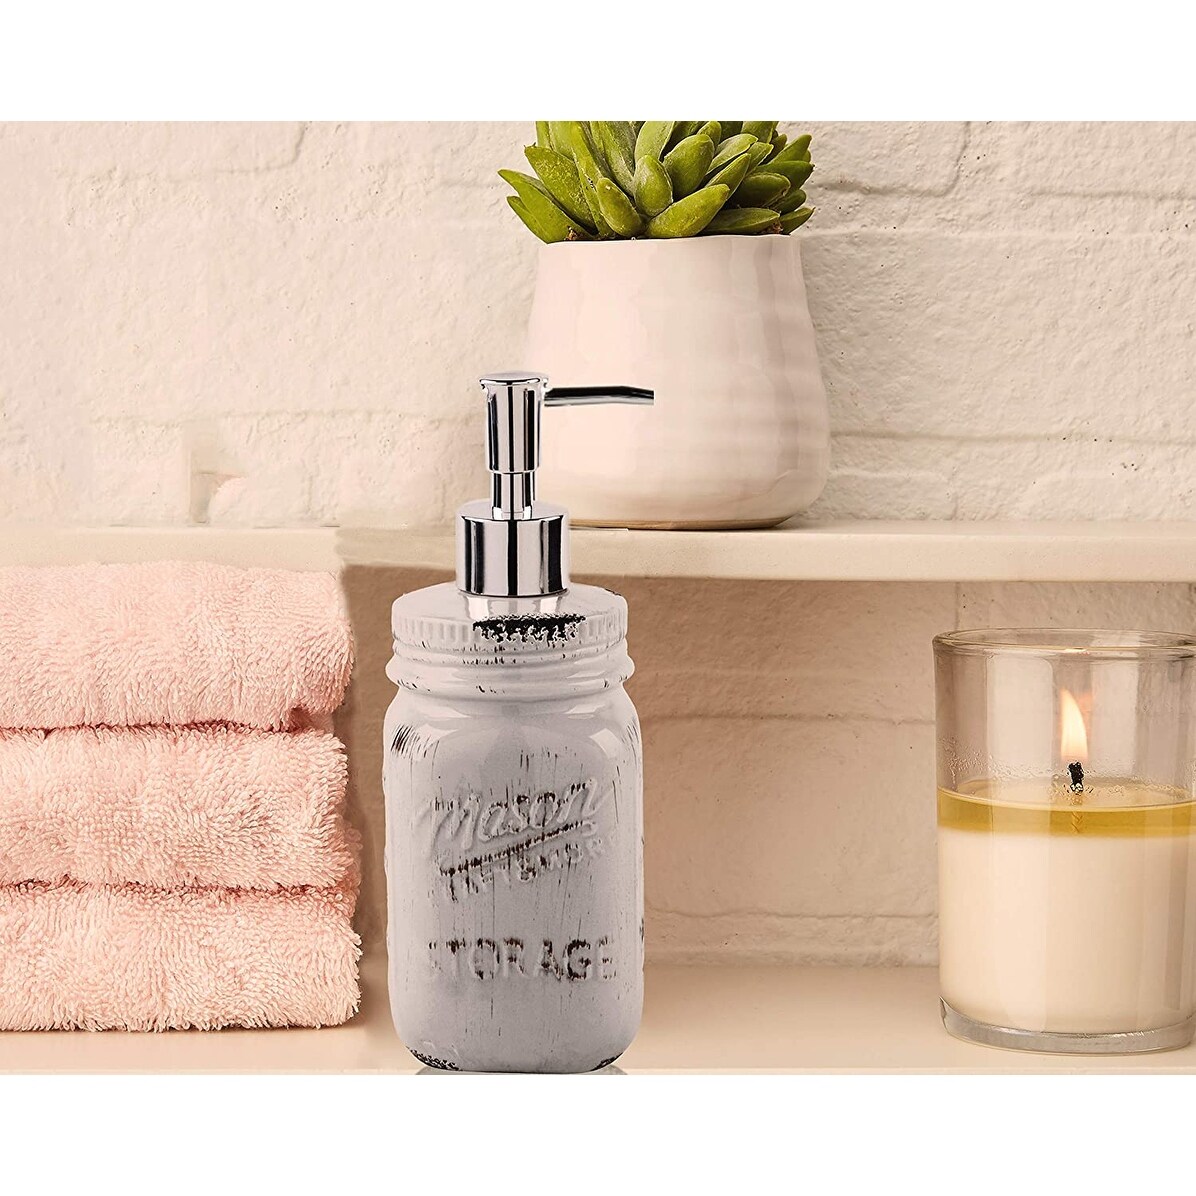 https://ak1.ostkcdn.com/images/products/is/images/direct/e52d9c69341ccc9c25f7600a12bade5f69db3160/Palais-Essentials-Refillable-Liquid-Hand-Soap-Dispenser-for-Bathroom%2C-Premium-Kitchen-Soap-and-Lotion-Dispenser.jpg